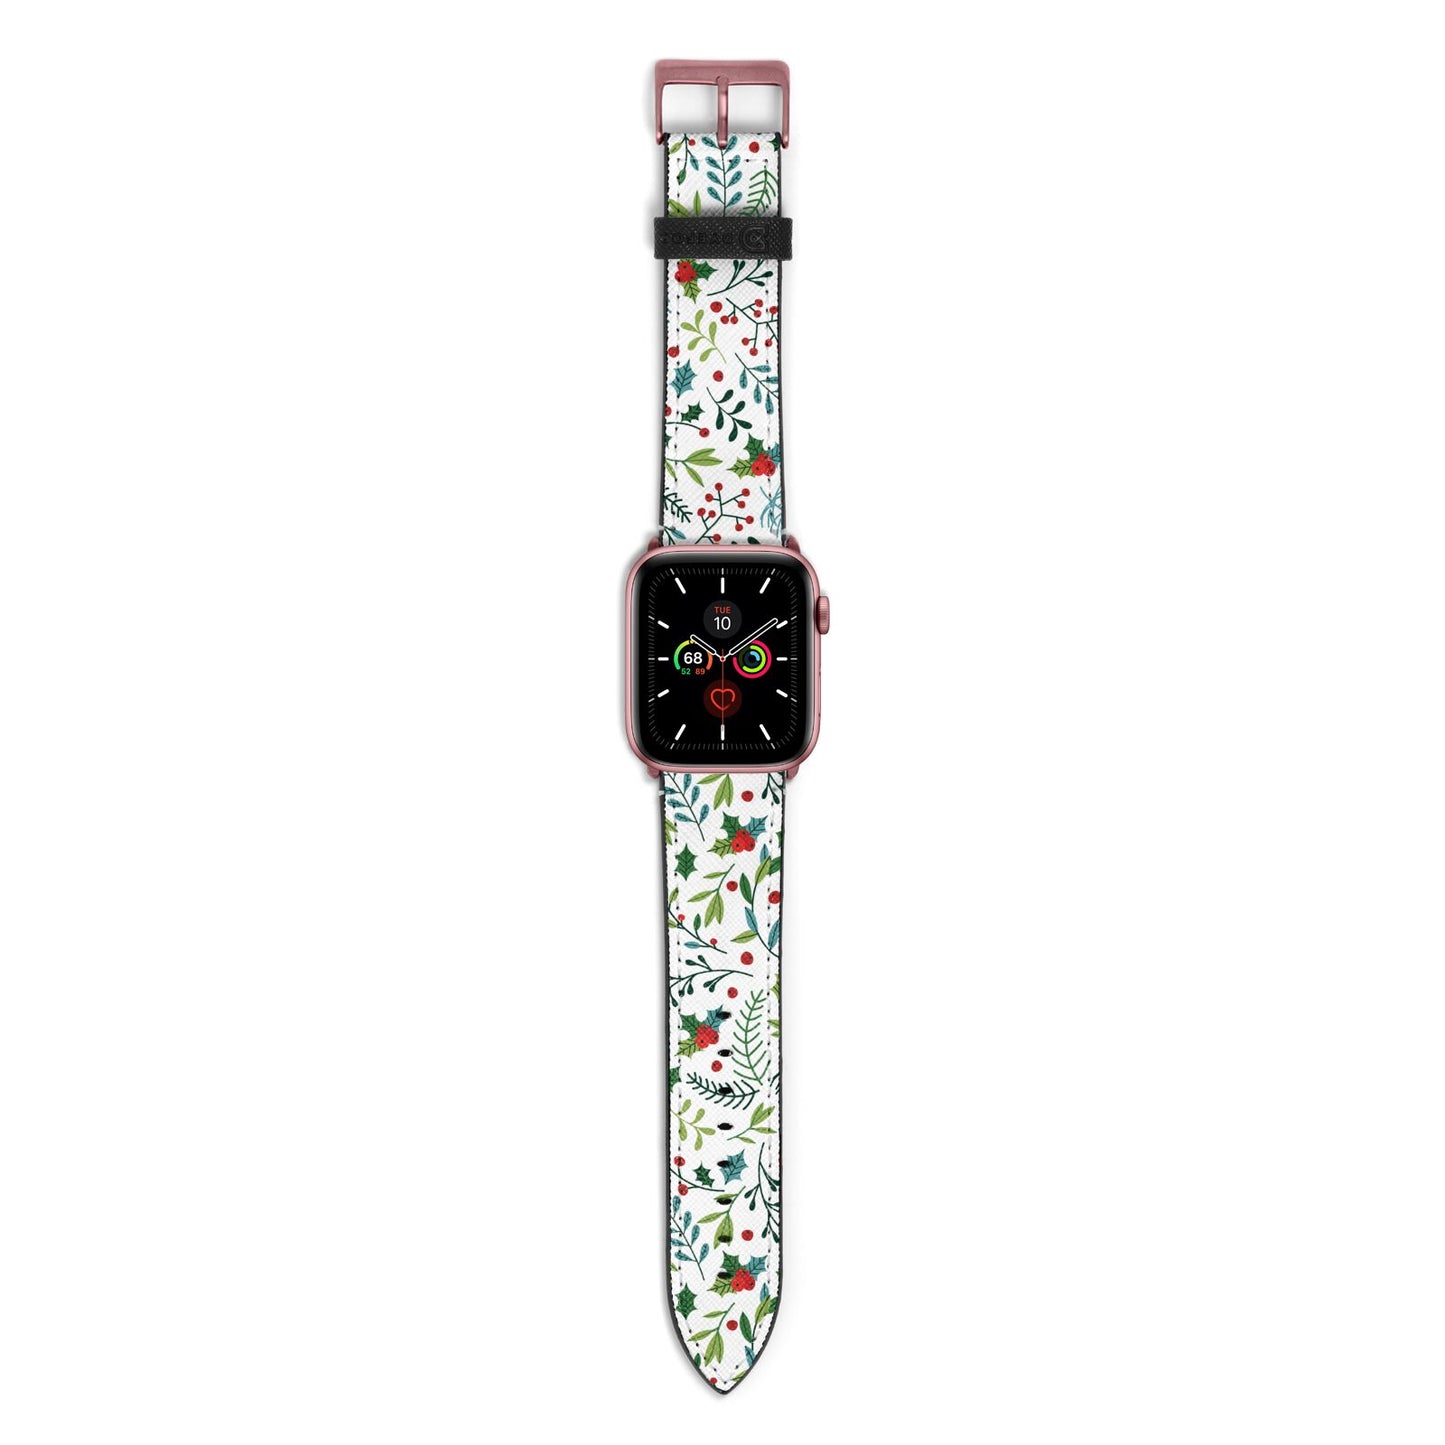 Winter Floral Apple Watch Strap with Rose Gold Hardware